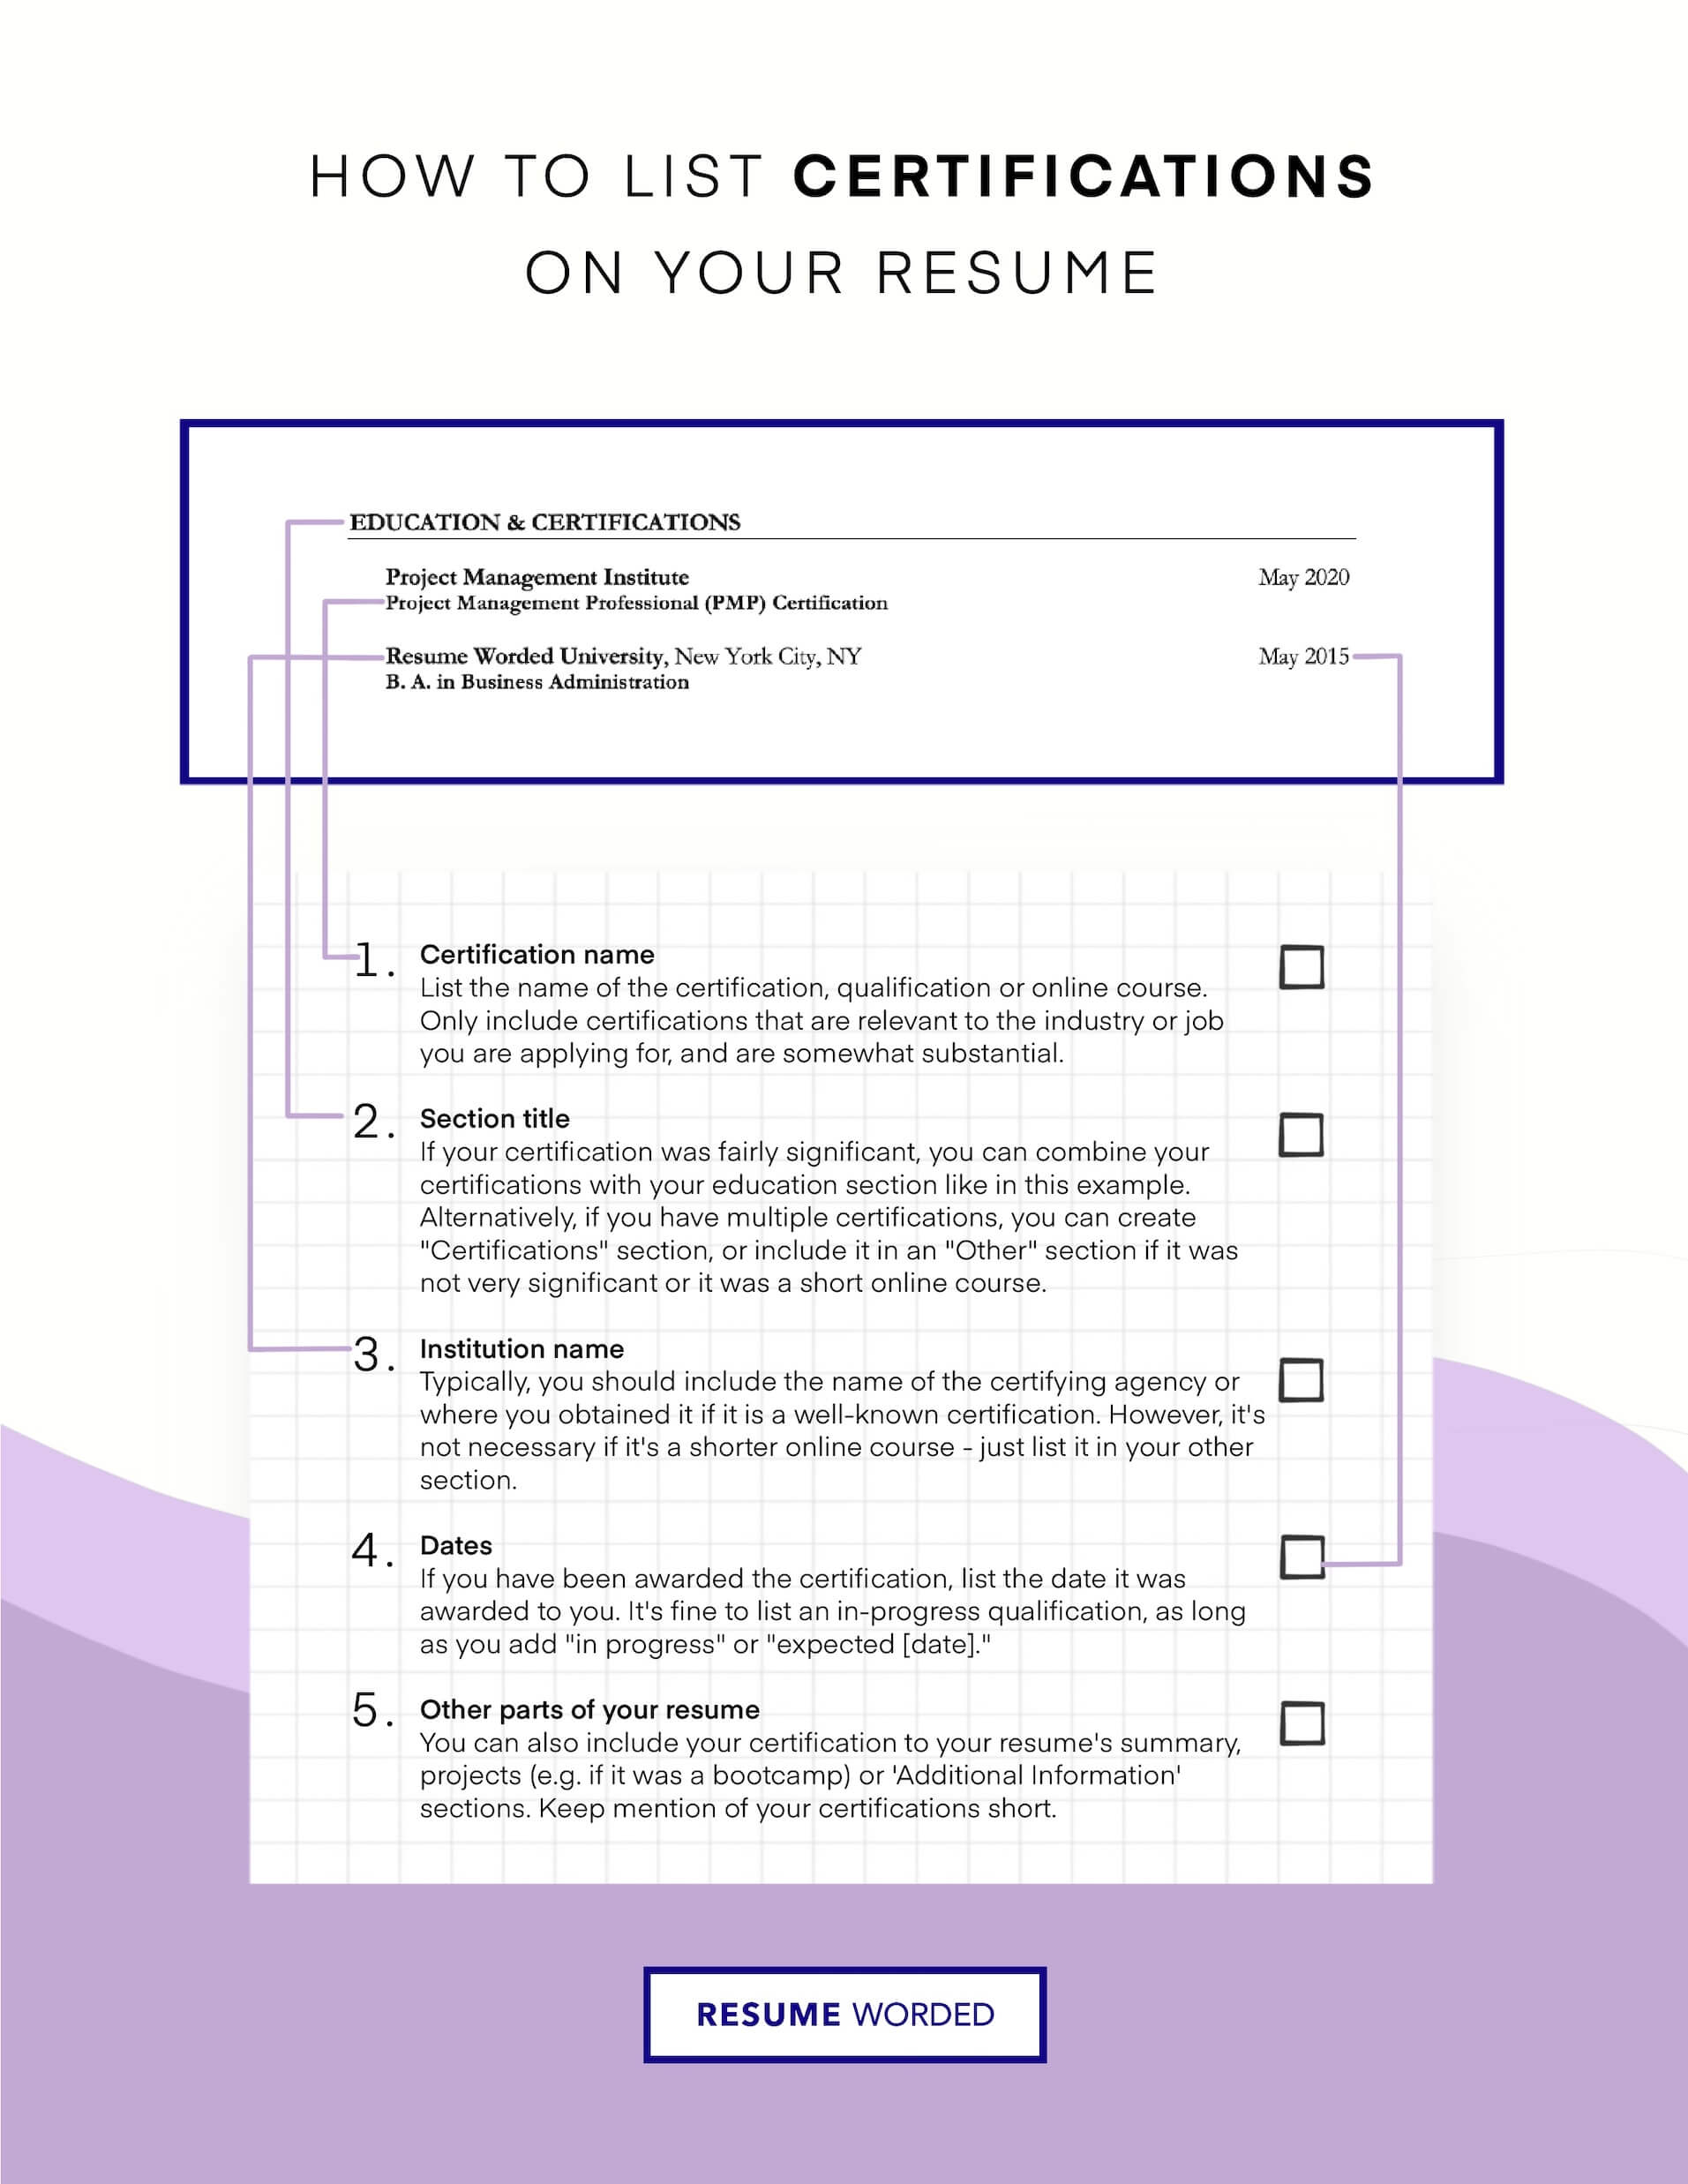 Include relevant microbiology or chemistry certifications. - Microbiologist Resume